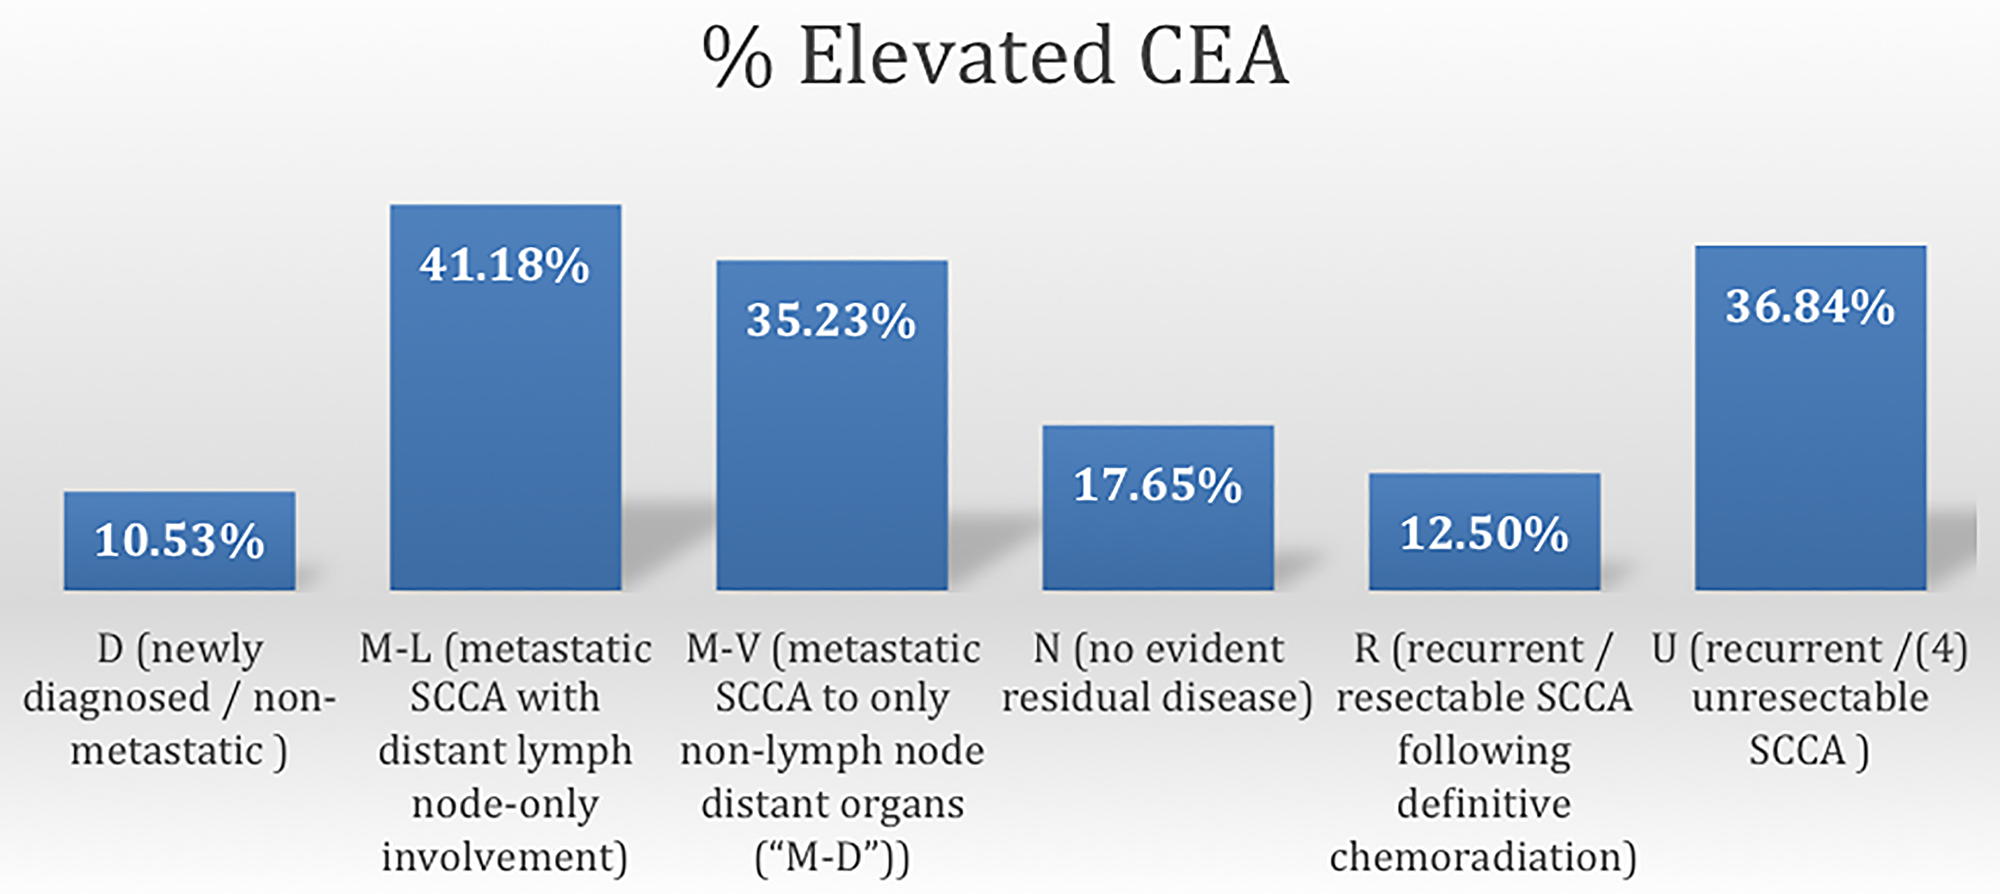 Figure 2: Frequency of elevated CEA according to disease status of SCCA.